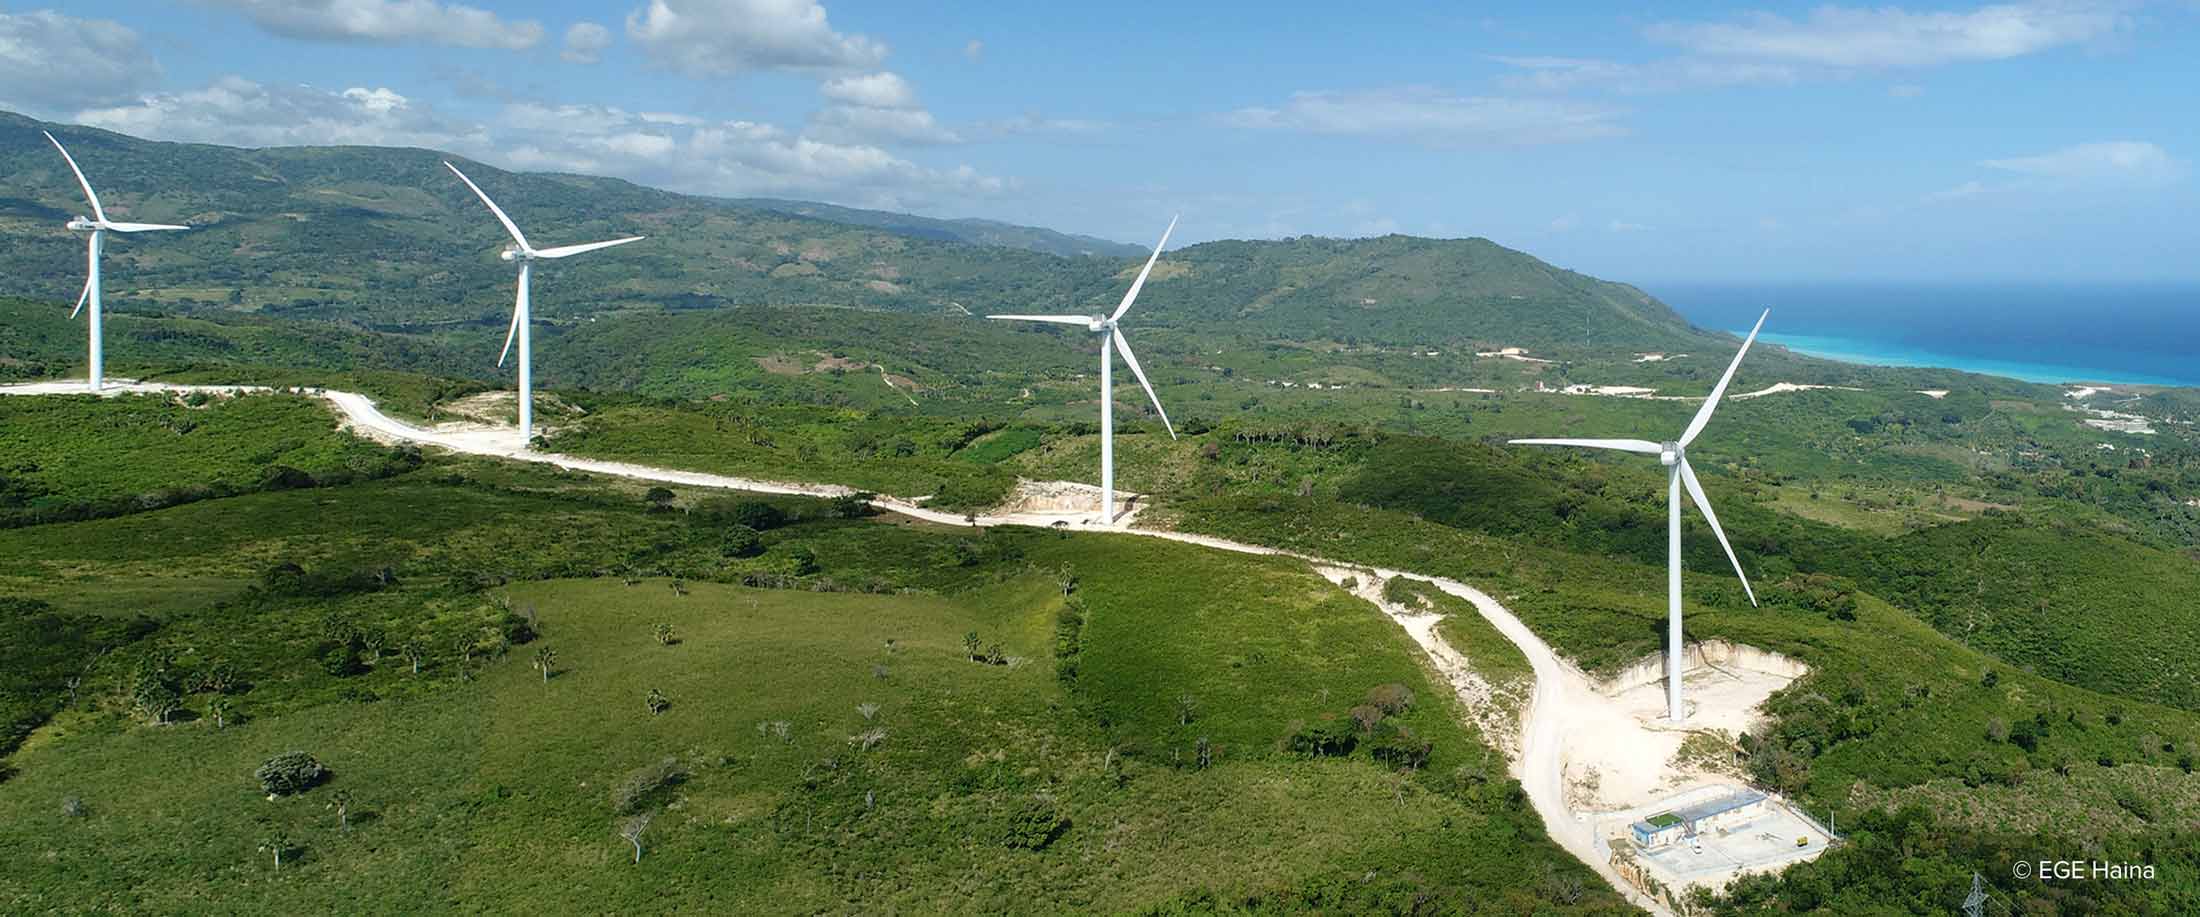 Larimar wind farm, a renewable energy project supported by carbon offsets in the Caribbean